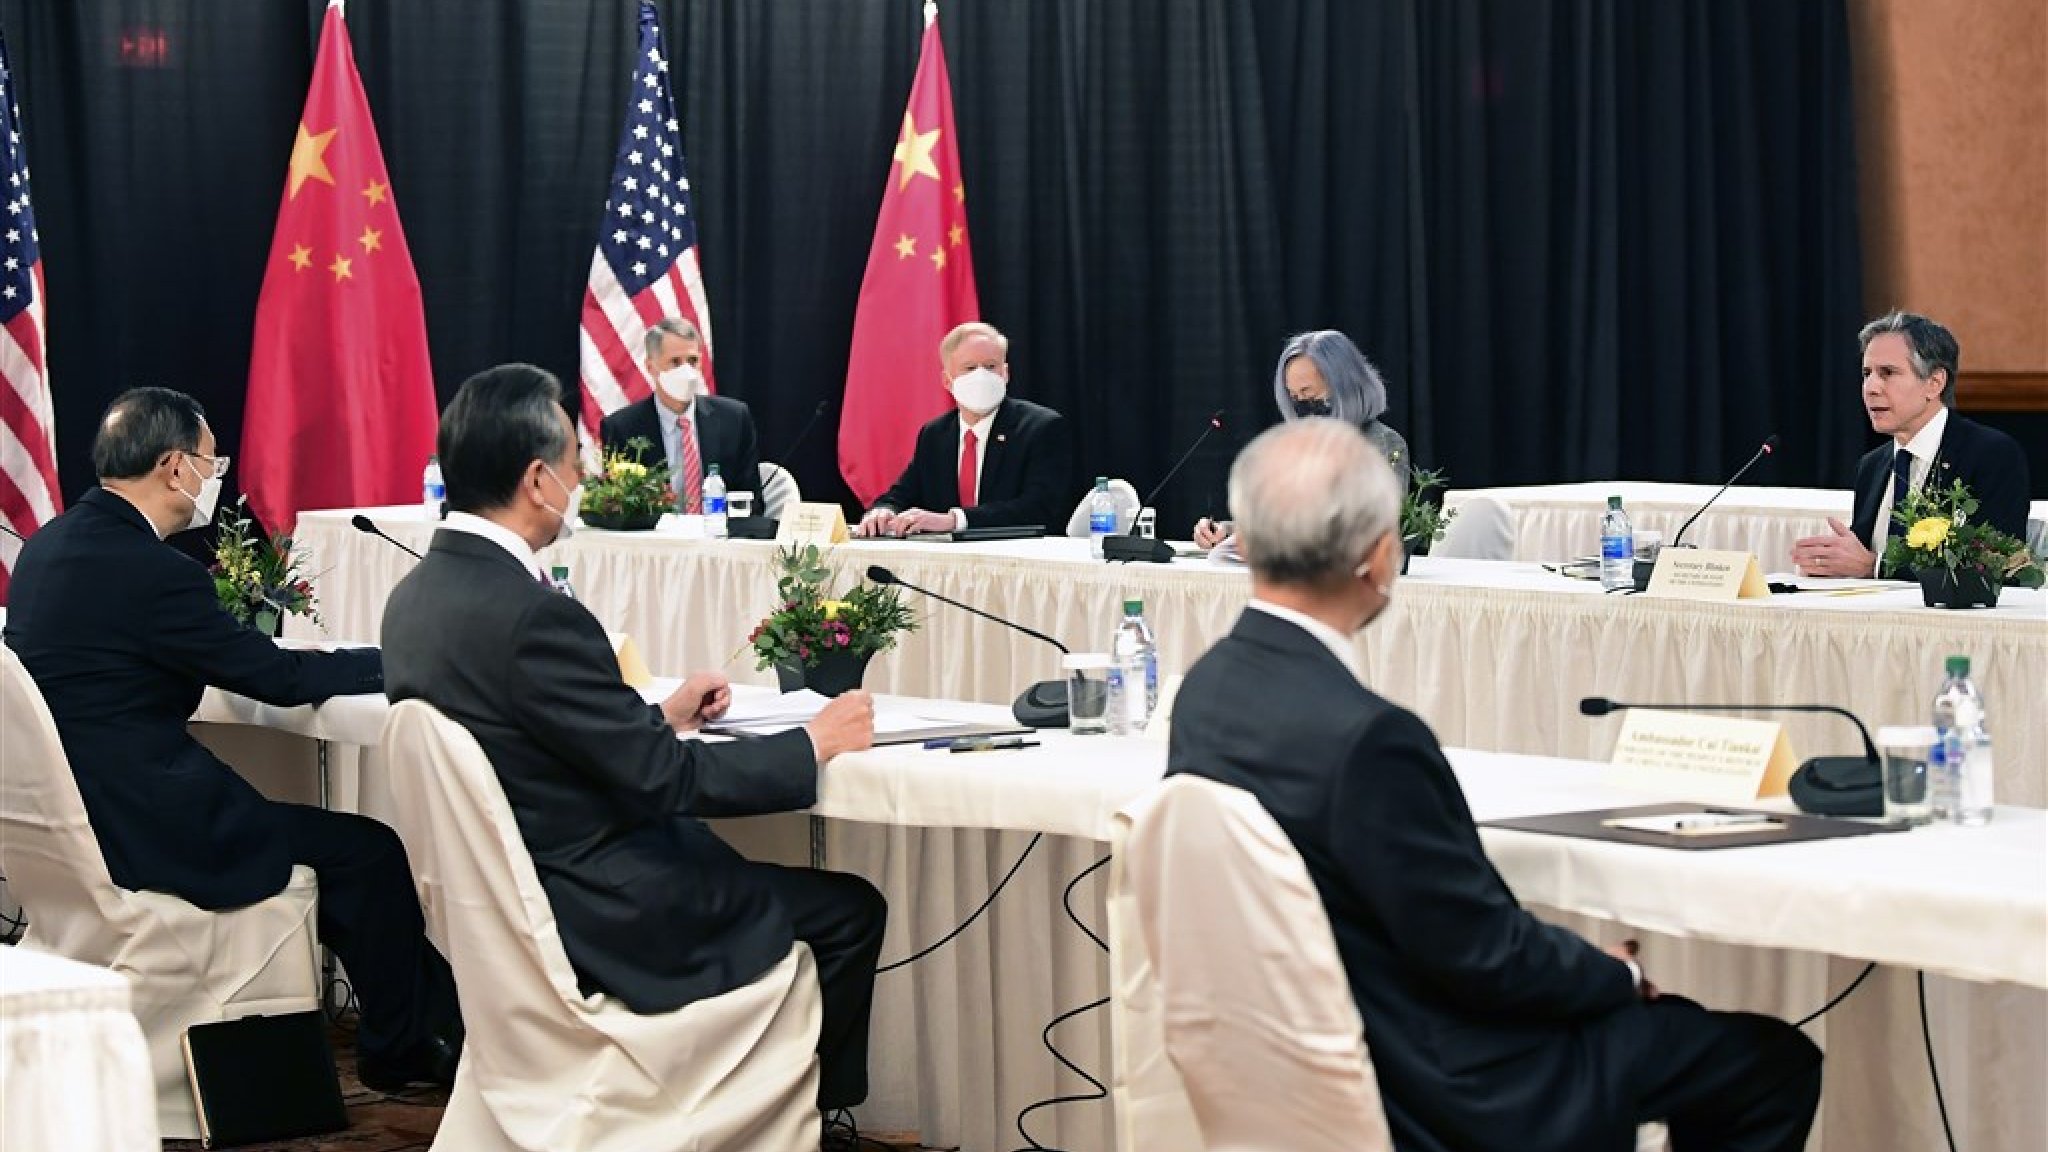 Conflict between Chinese and American diplomats during the summit